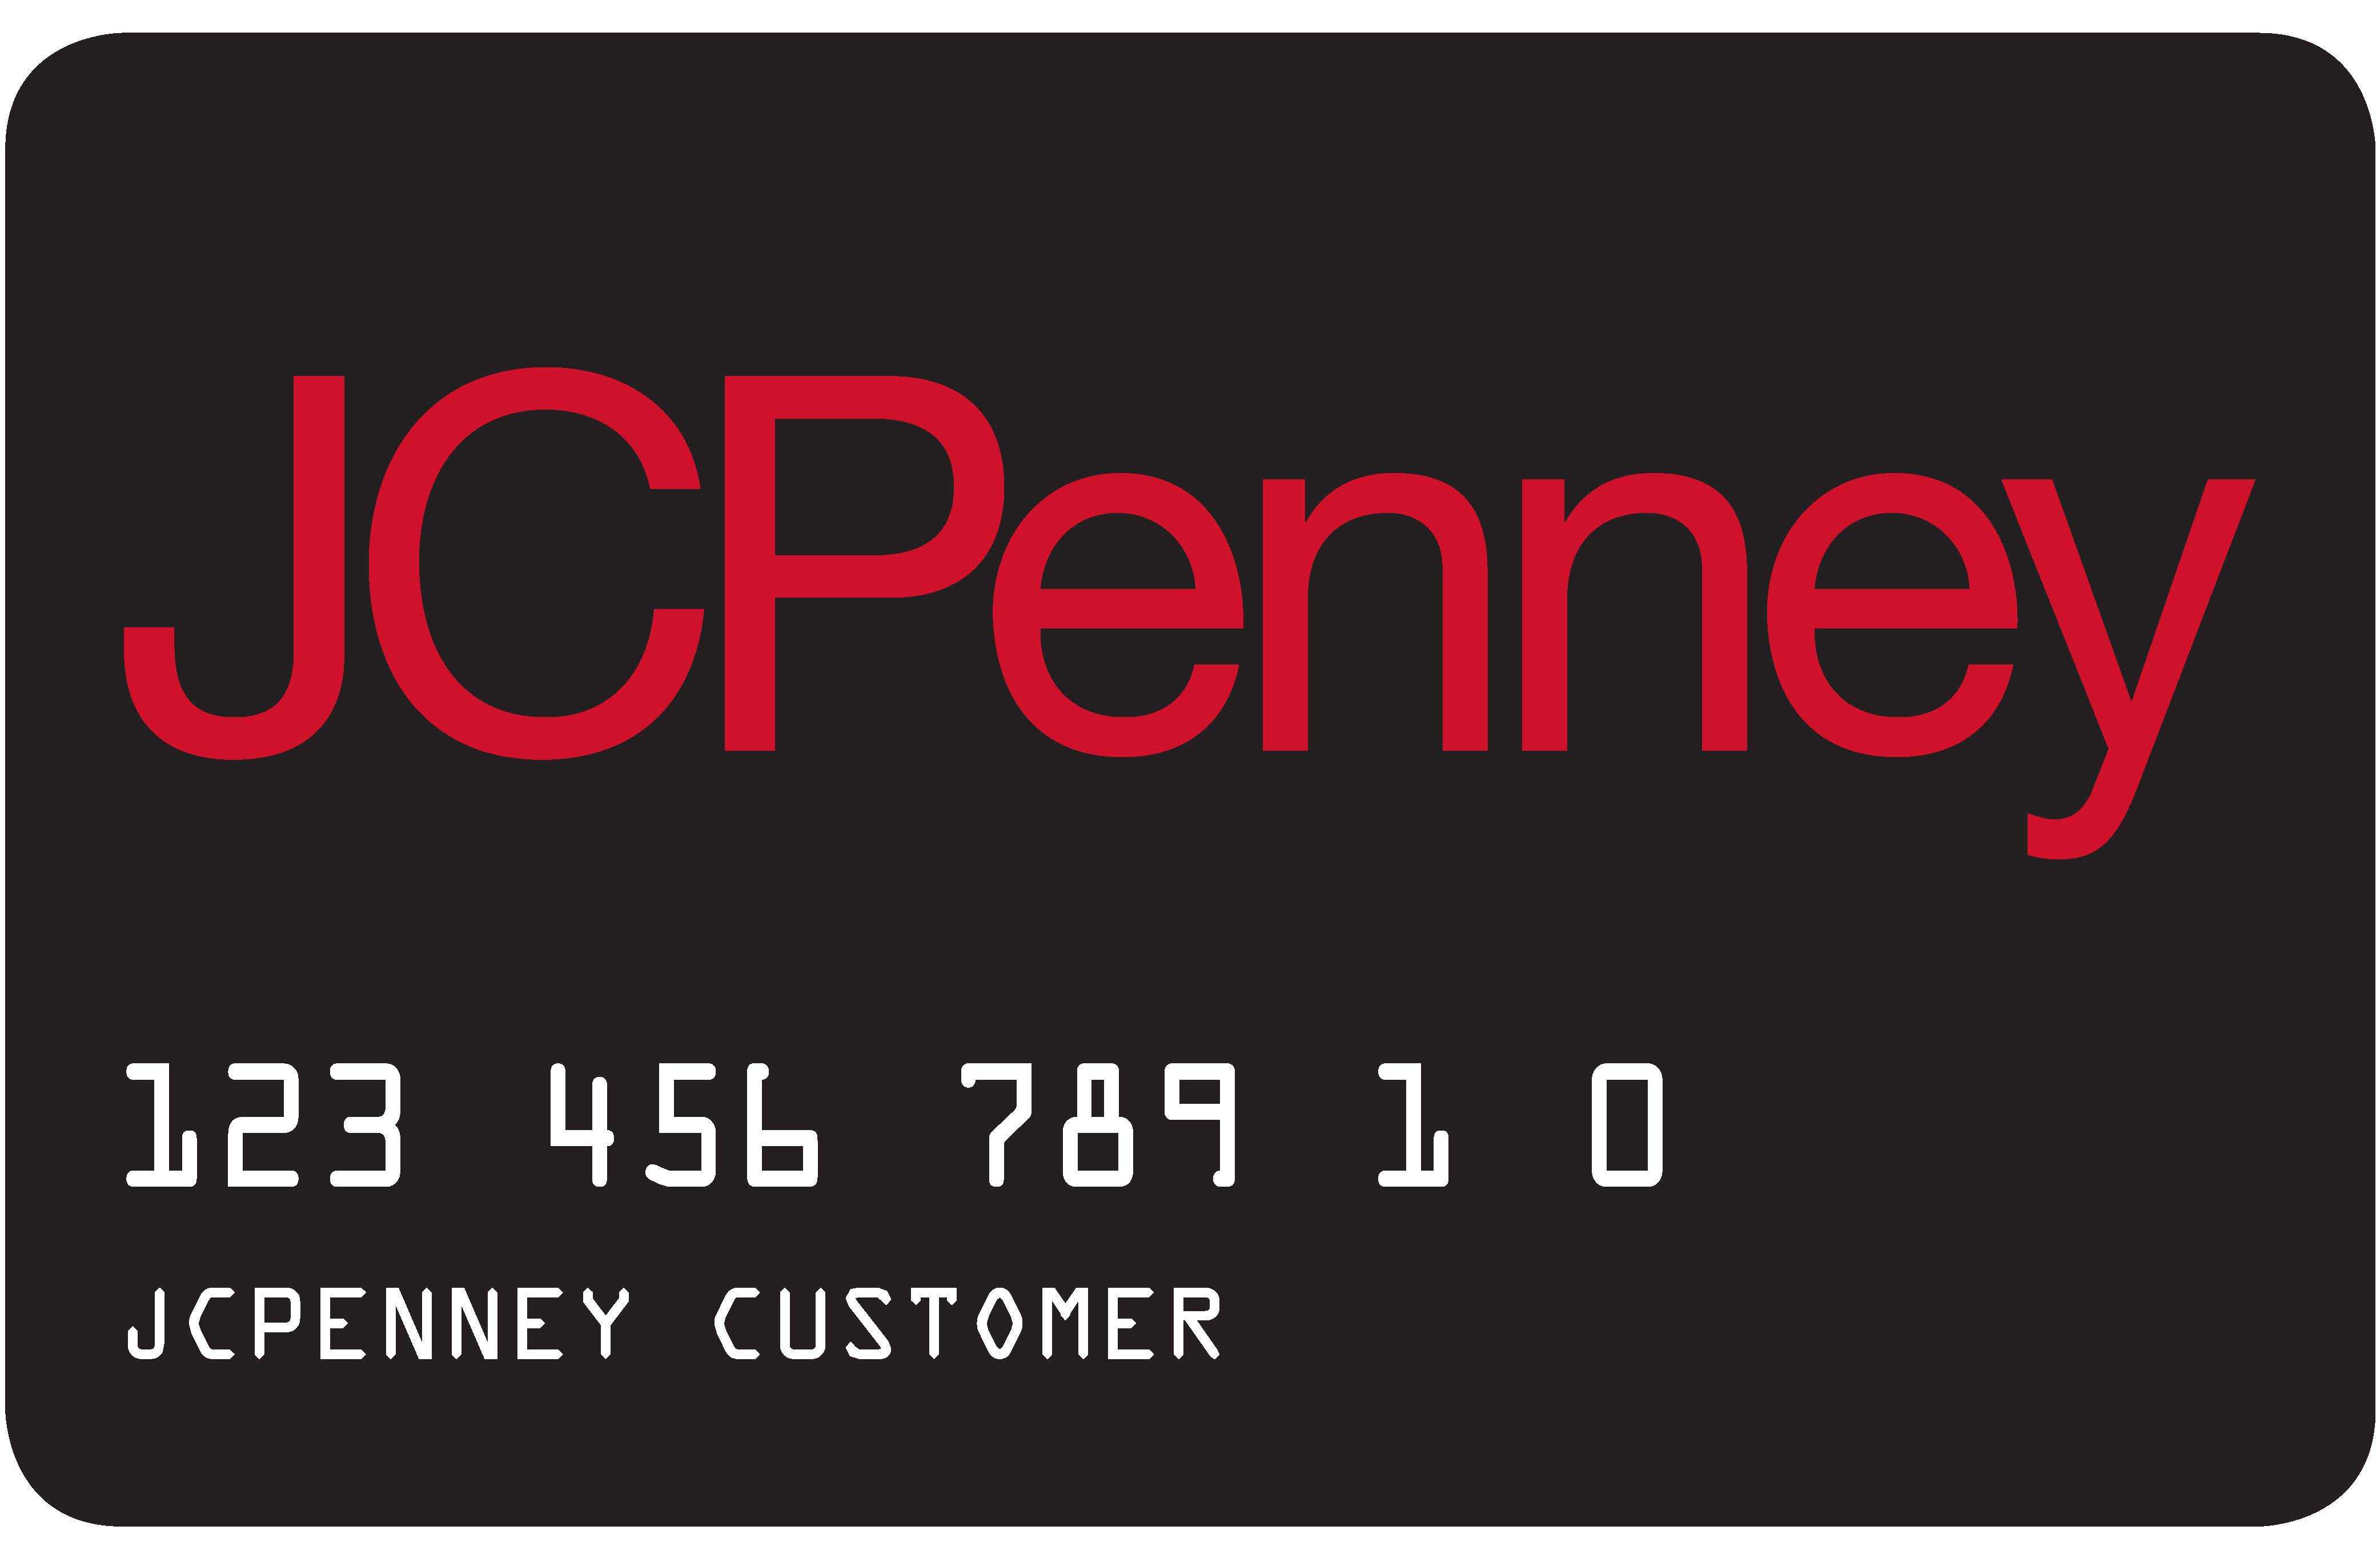 Apple Pay Credit Card Logo - Synchrony Financial Integrates Private Label Credit Cards